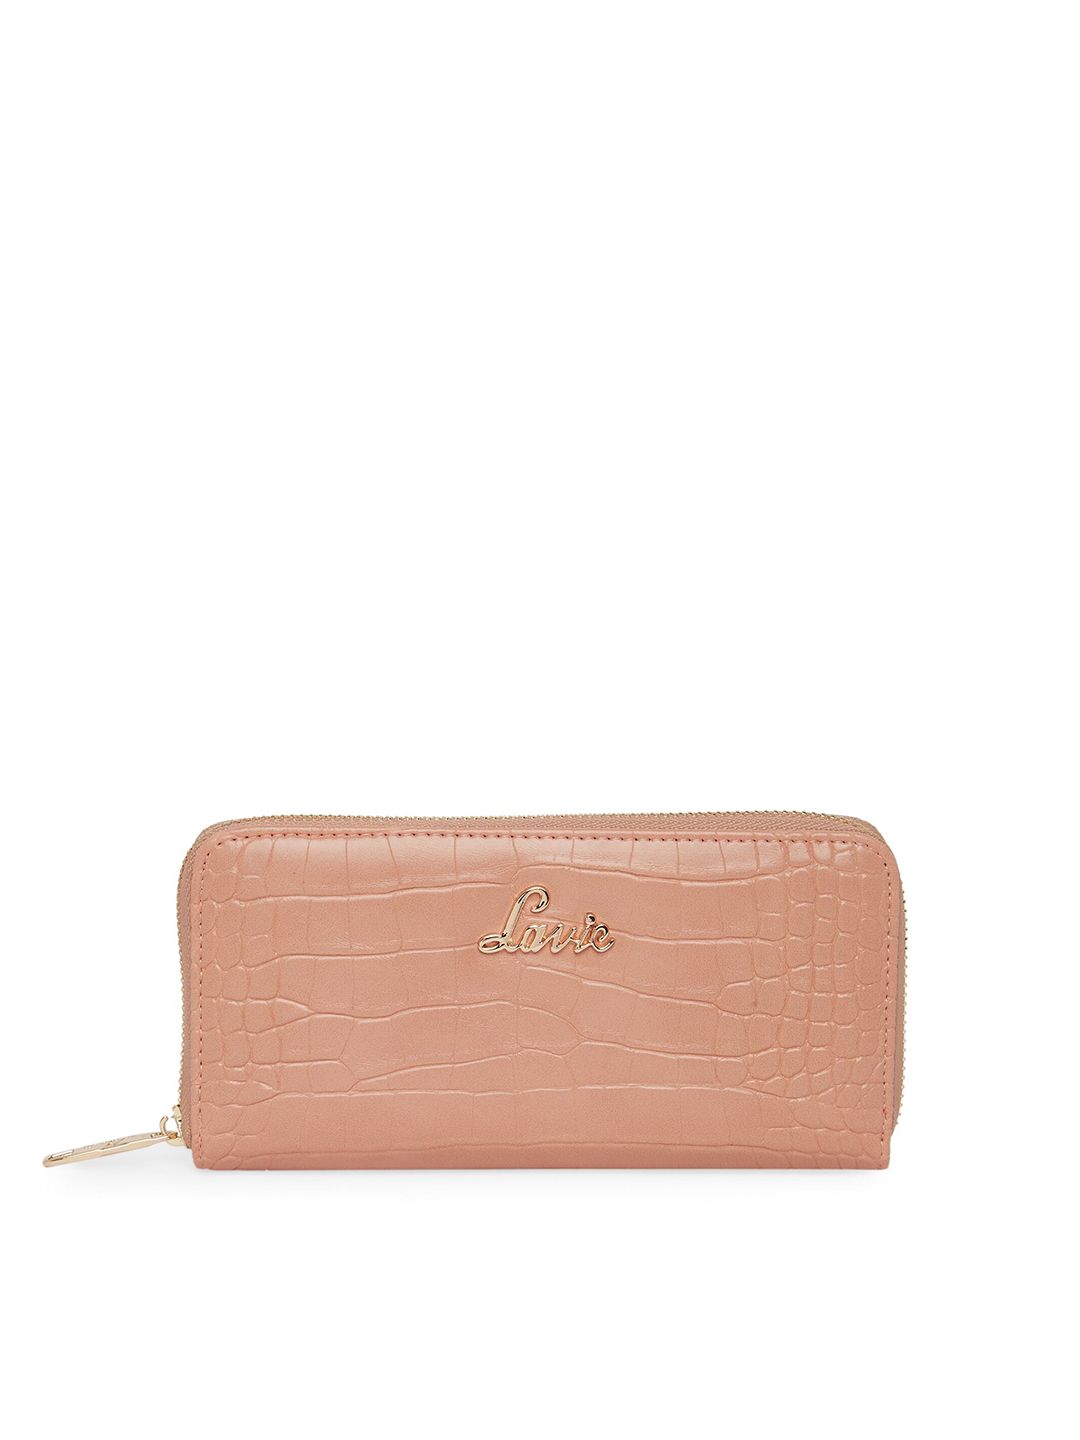 Lavie Women Pink & Gold-Toned Textured Envelope Price in India